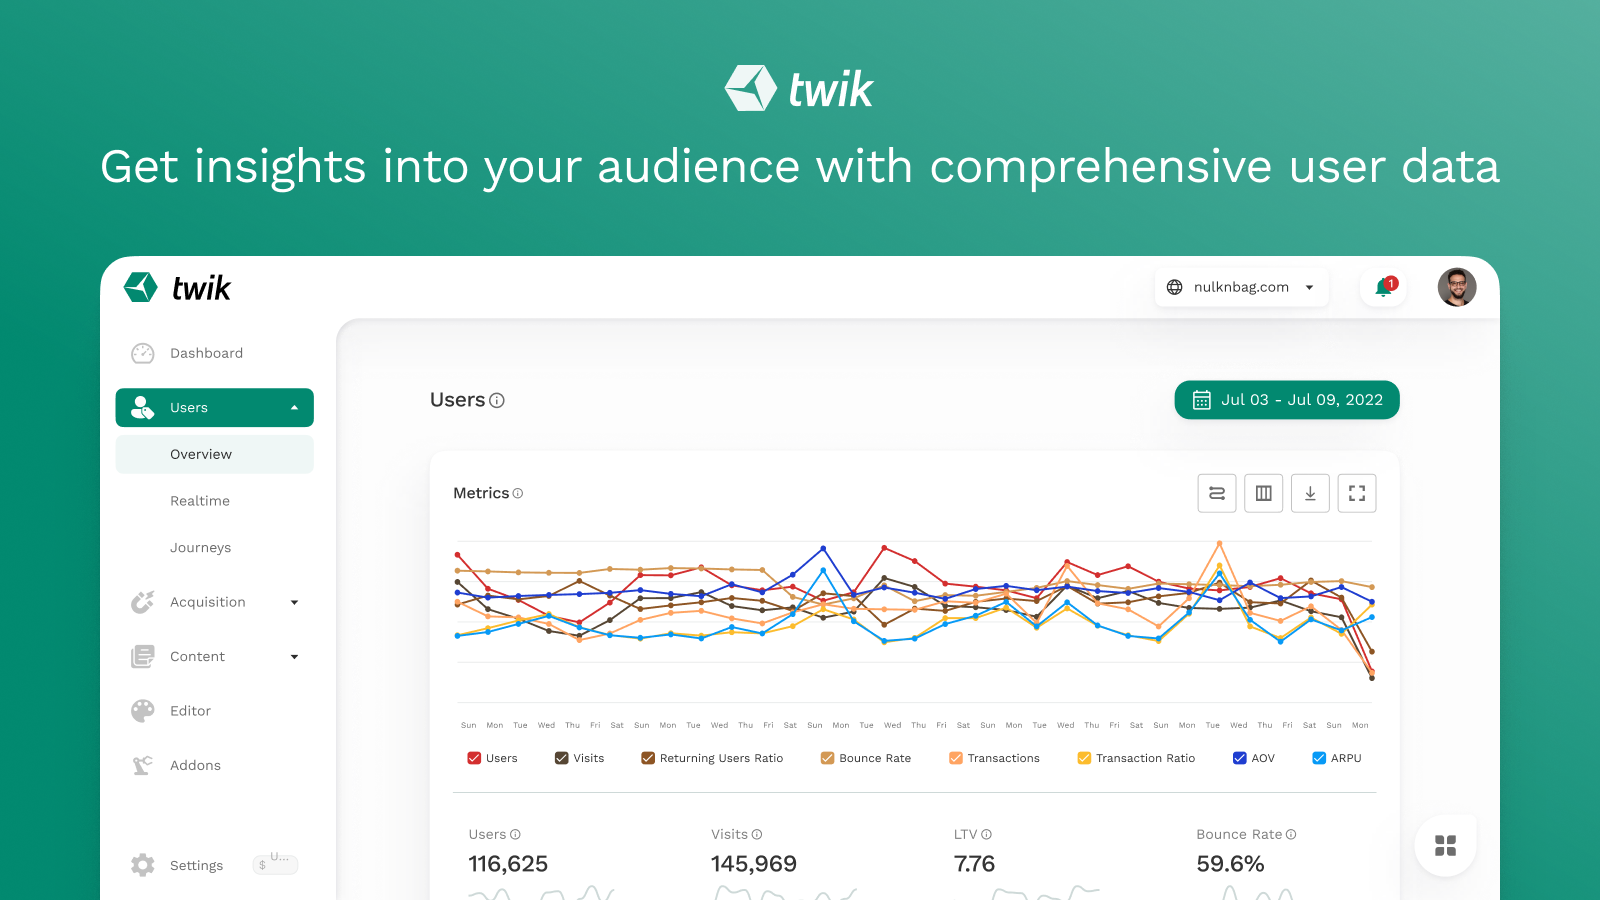 Get insights into your audience with comprehensive user data